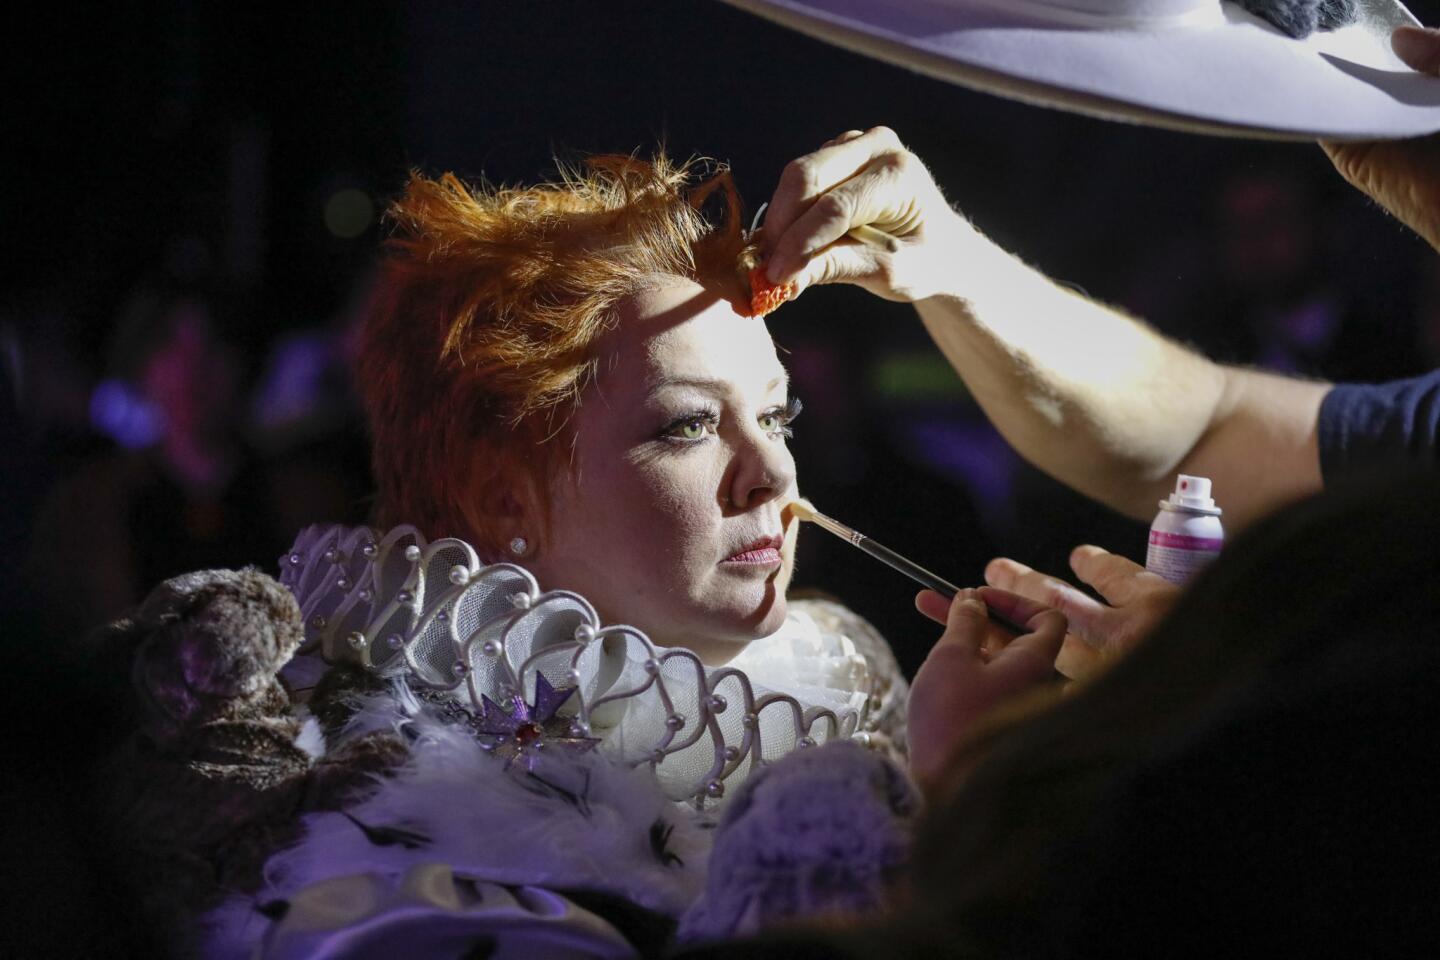 Presenter Melissa McCarthy gets a makeup touch-up backstage before heading onstage to hand out the award for costume design.